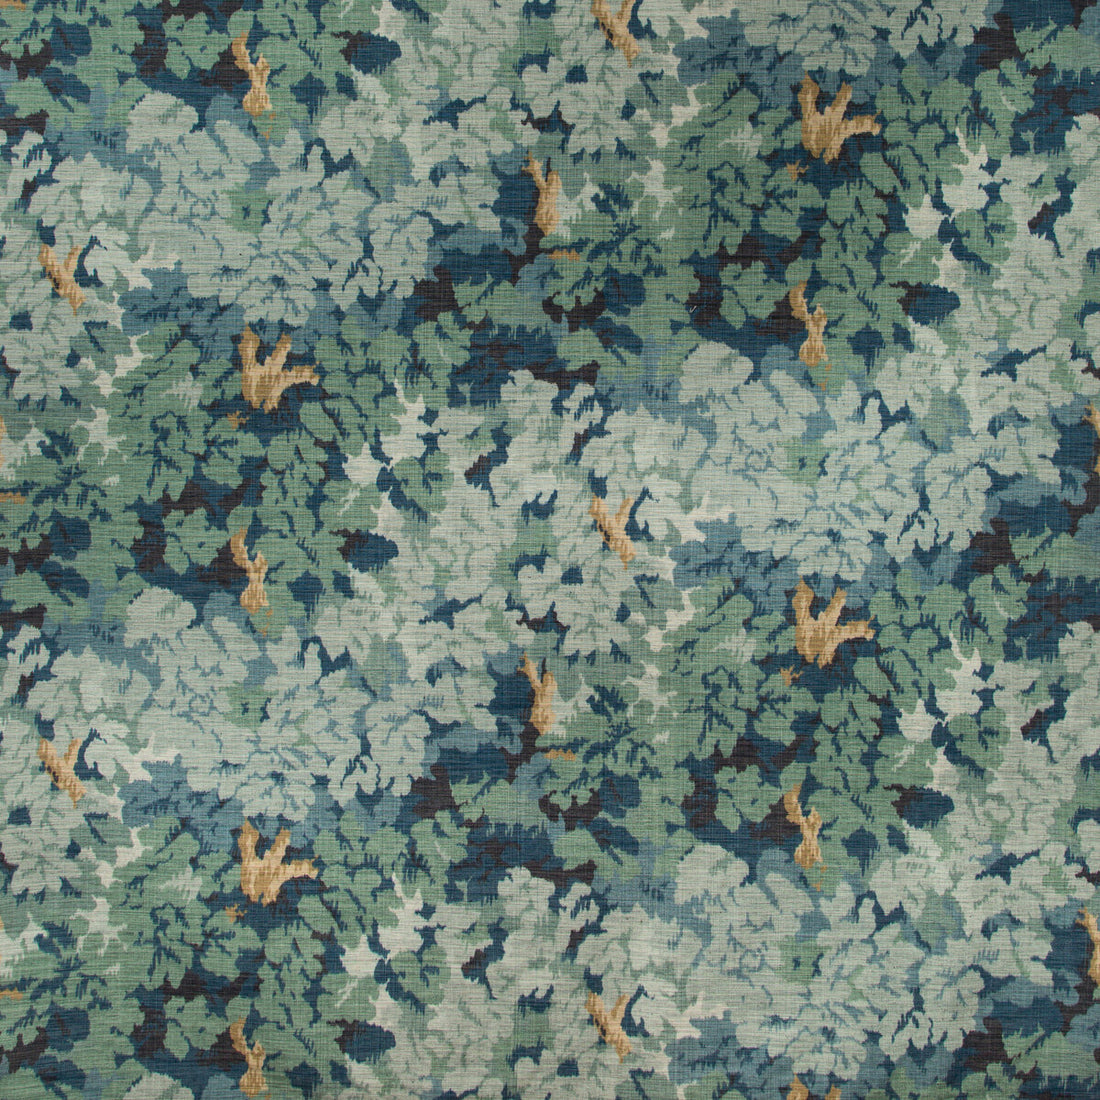 Arley Print fabric in lagoon color - pattern 2019101.313.0 - by Lee Jofa in the Manor House collection